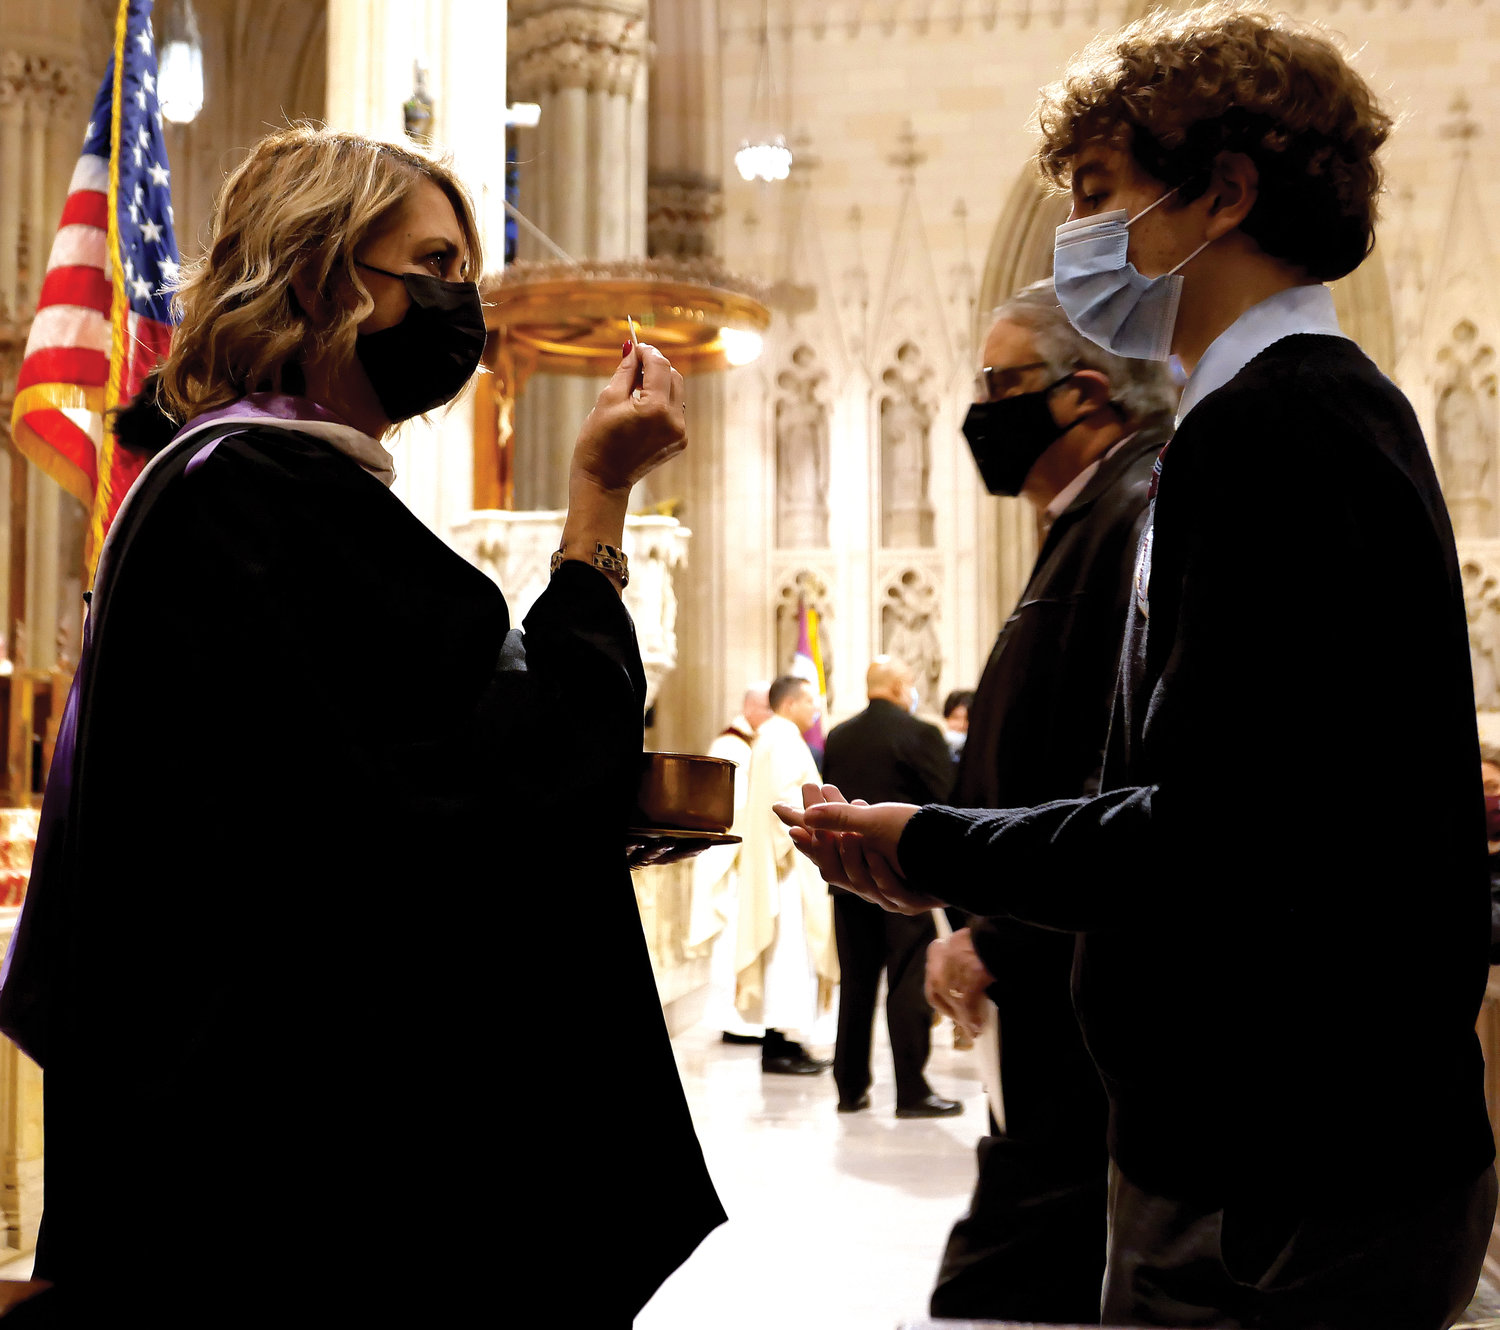 Communion is distributed at St. Patrick’s Cathedral Dec. 3, the Feast of St. Francis Xavier.